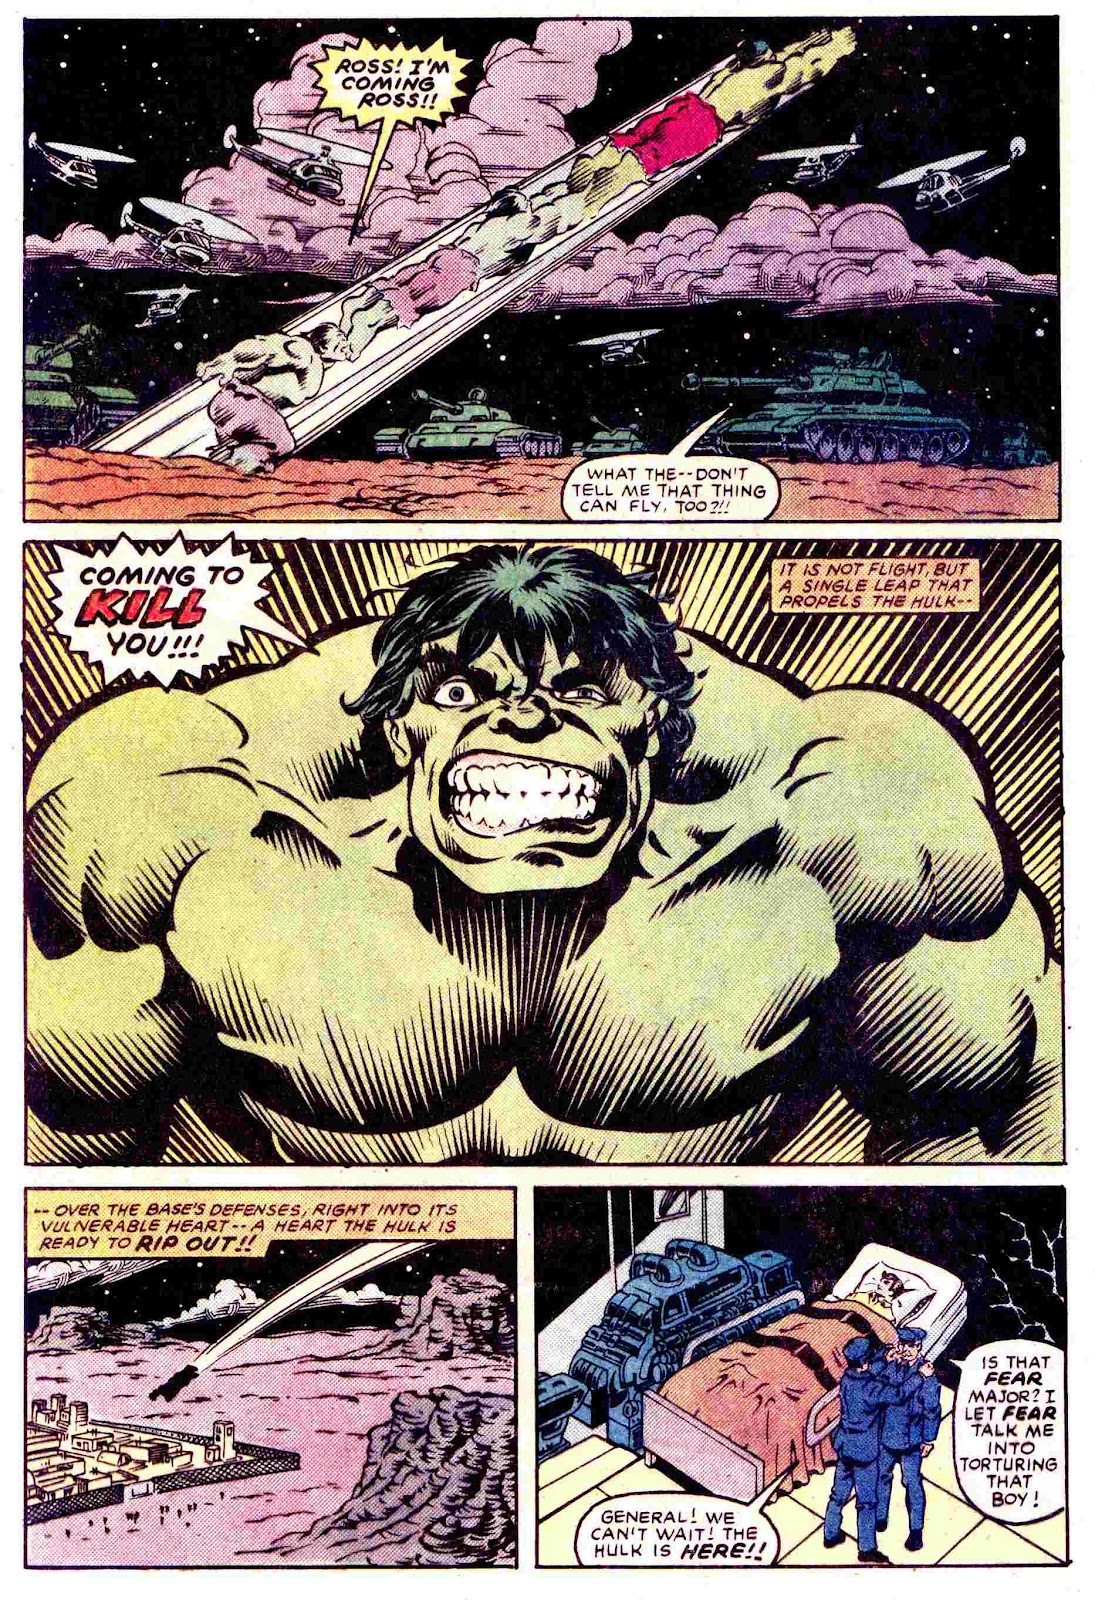 What If? (1977) issue 45 - The Hulk went Berserk - Page 23